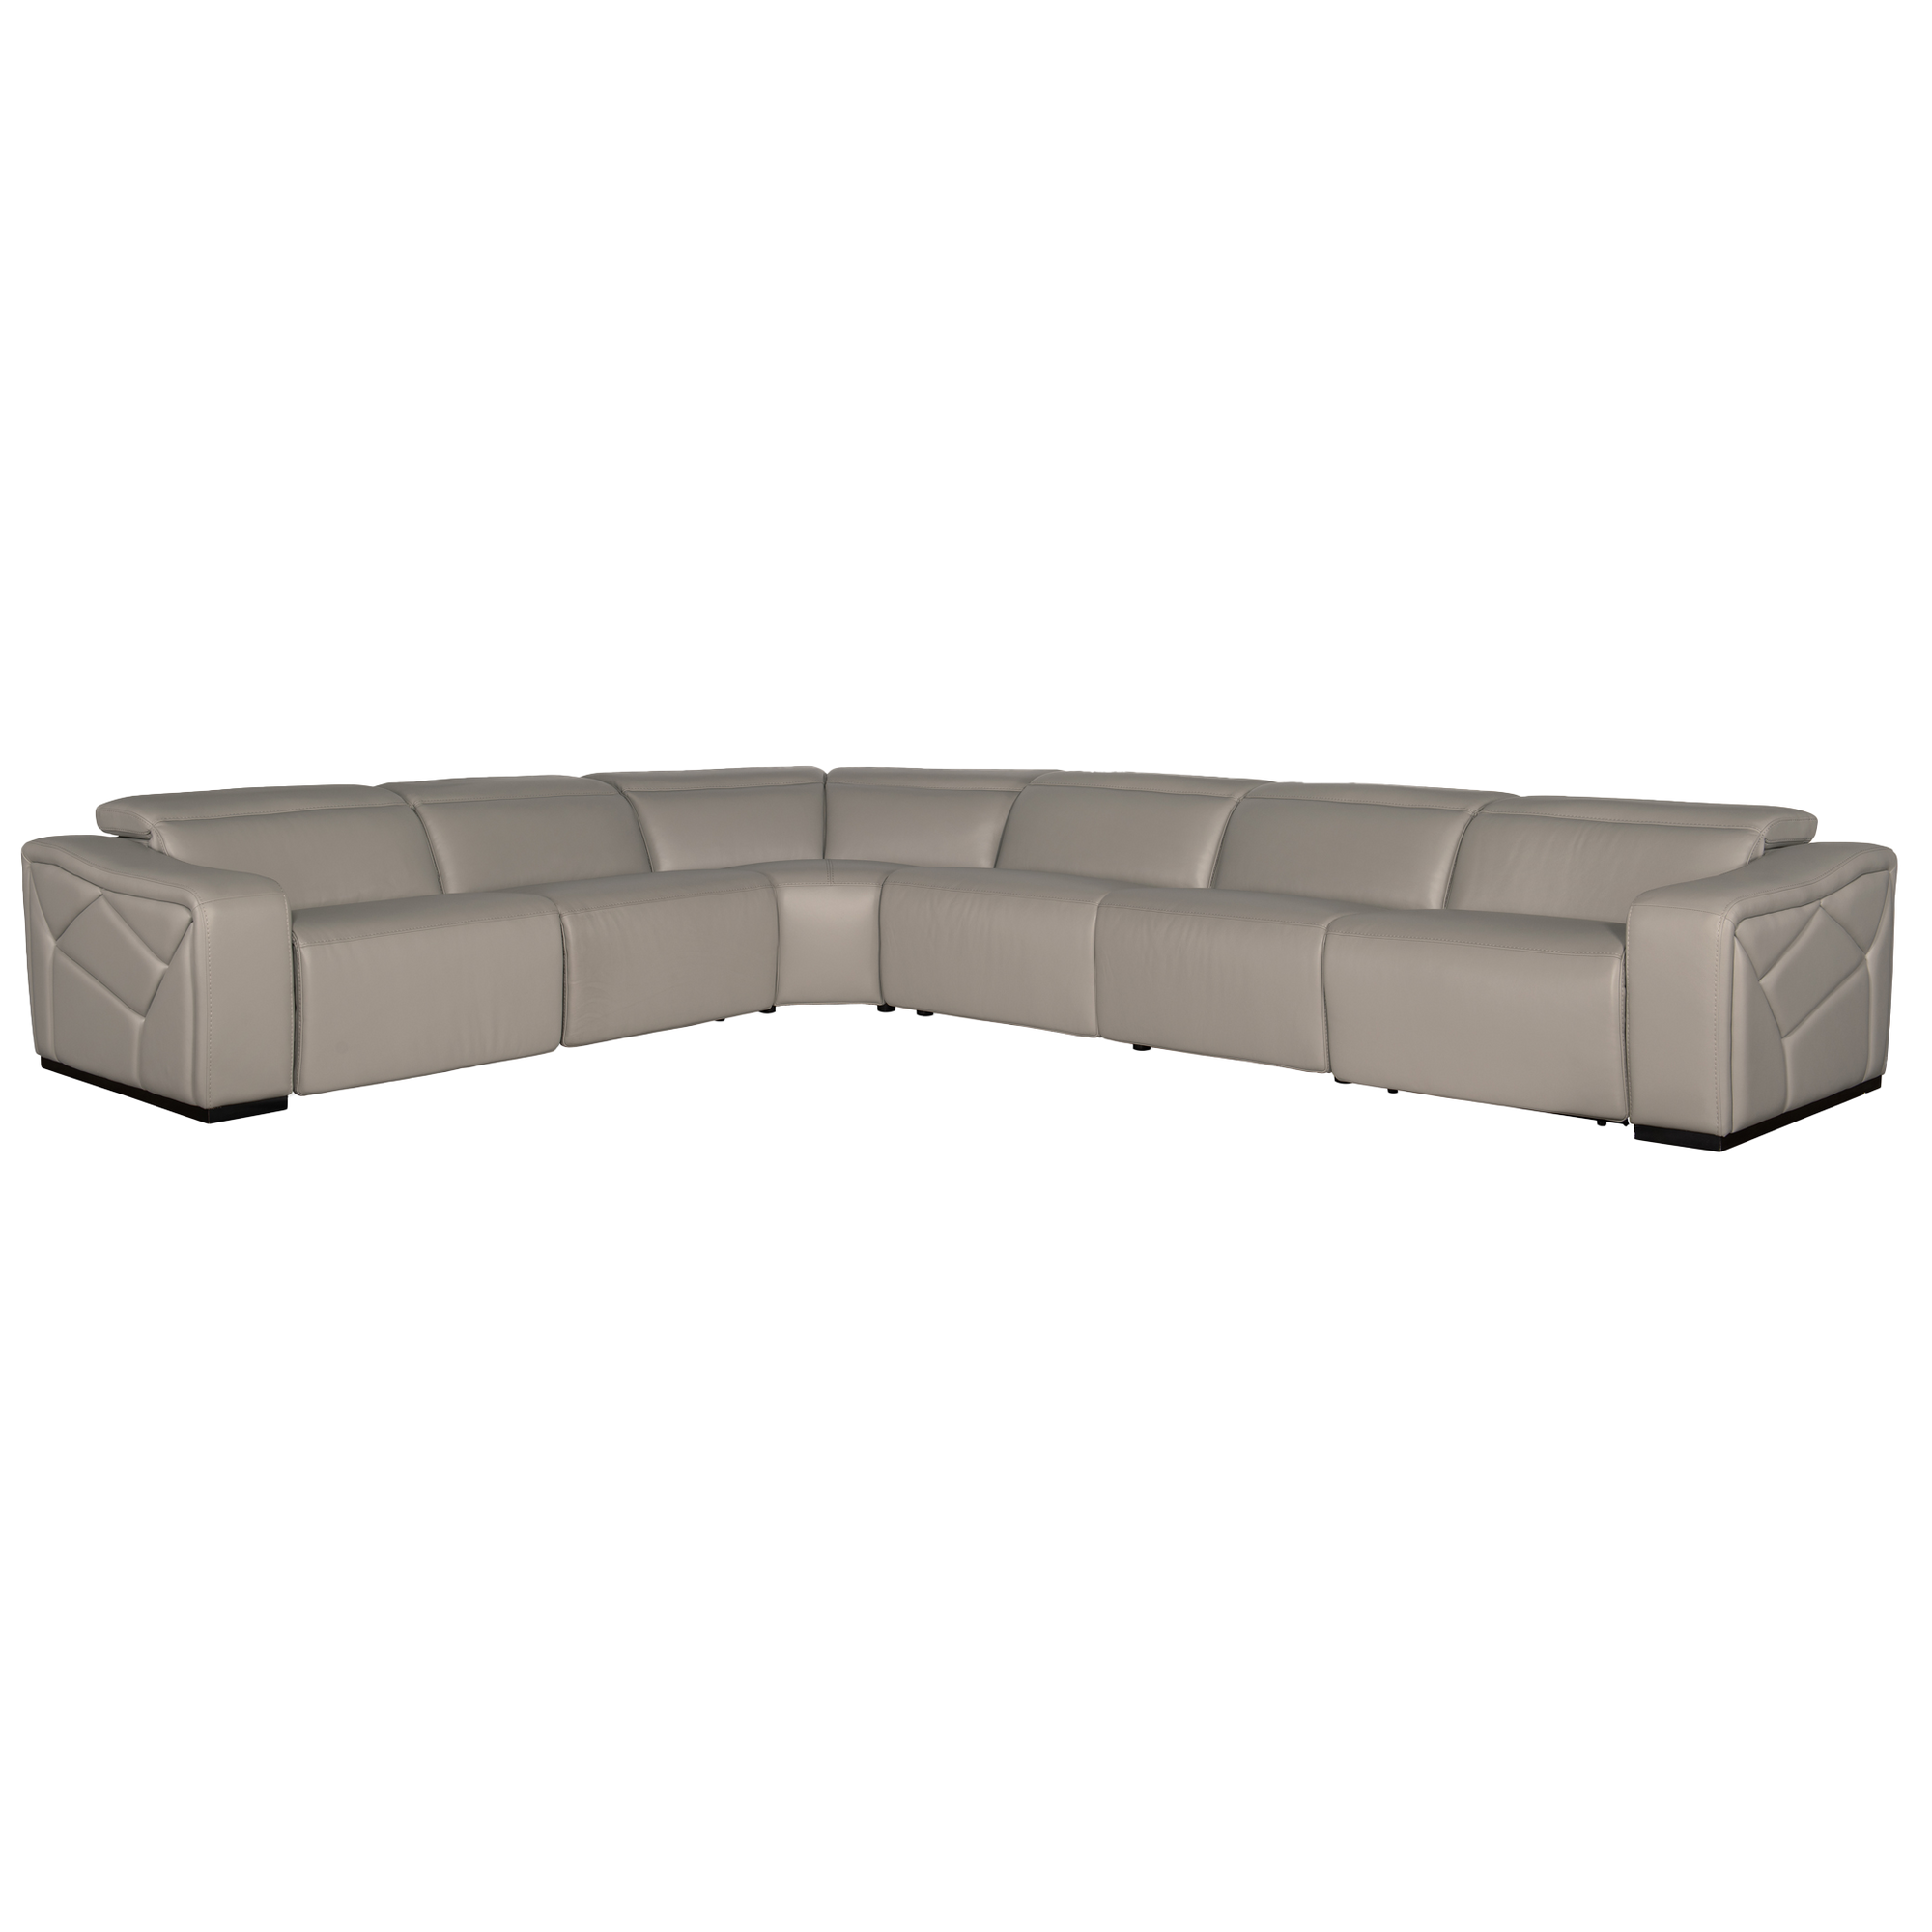 Otilla 6-Piece Leather Upholstered Sectional, Gray